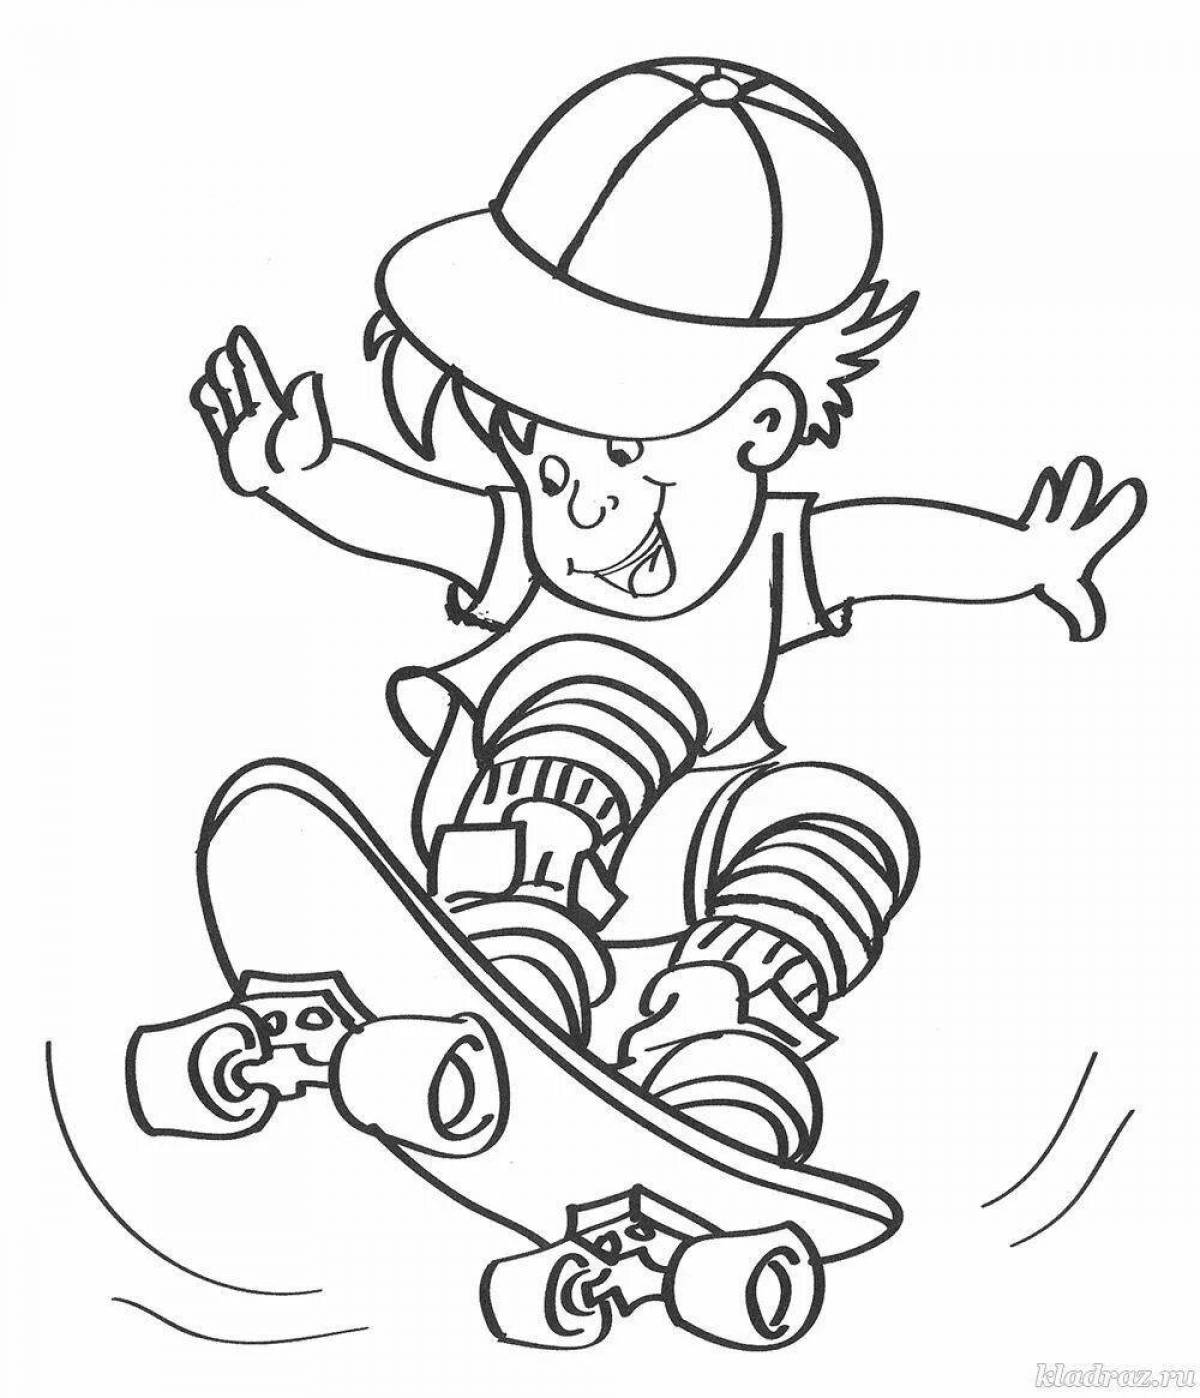 Inviting sports coloring book for 4-5 year olds